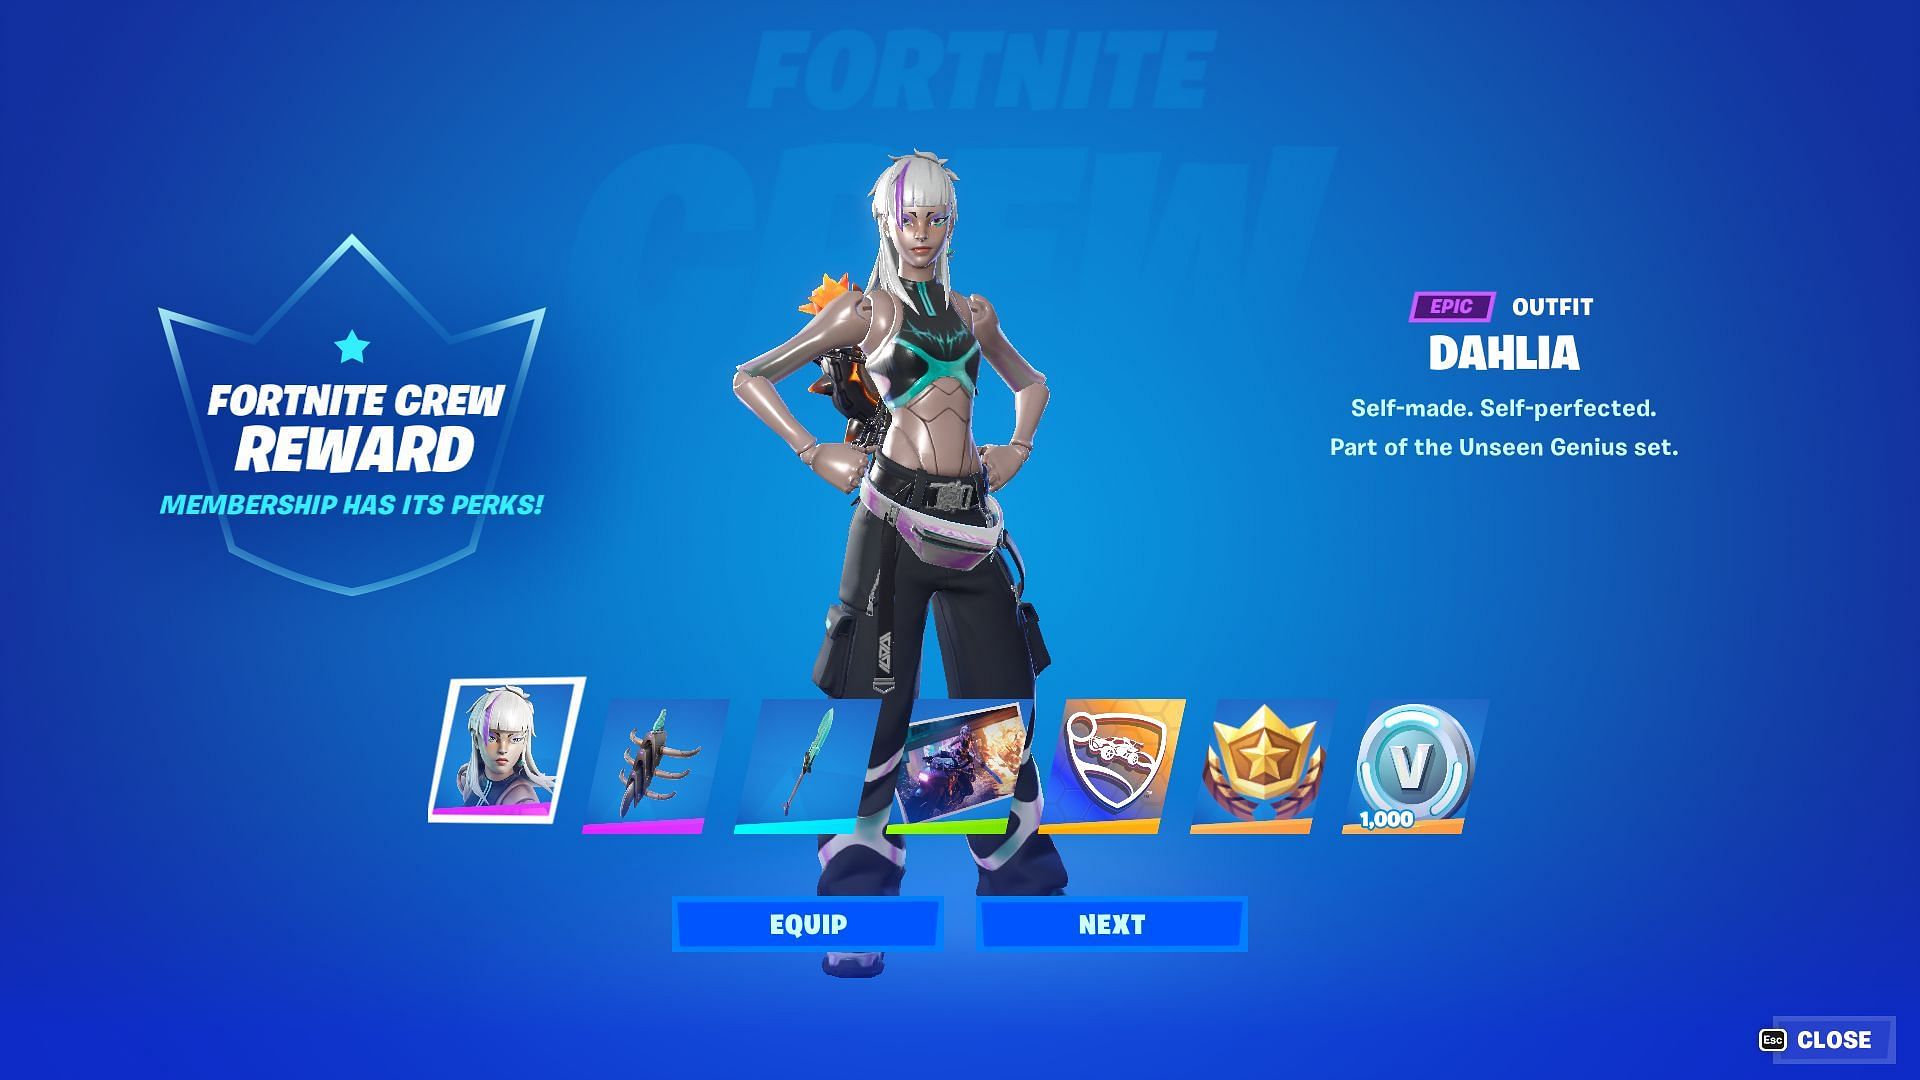 Dahlia is the Crew Pack Outfit for May (Image via Epic Games/Fortnite)